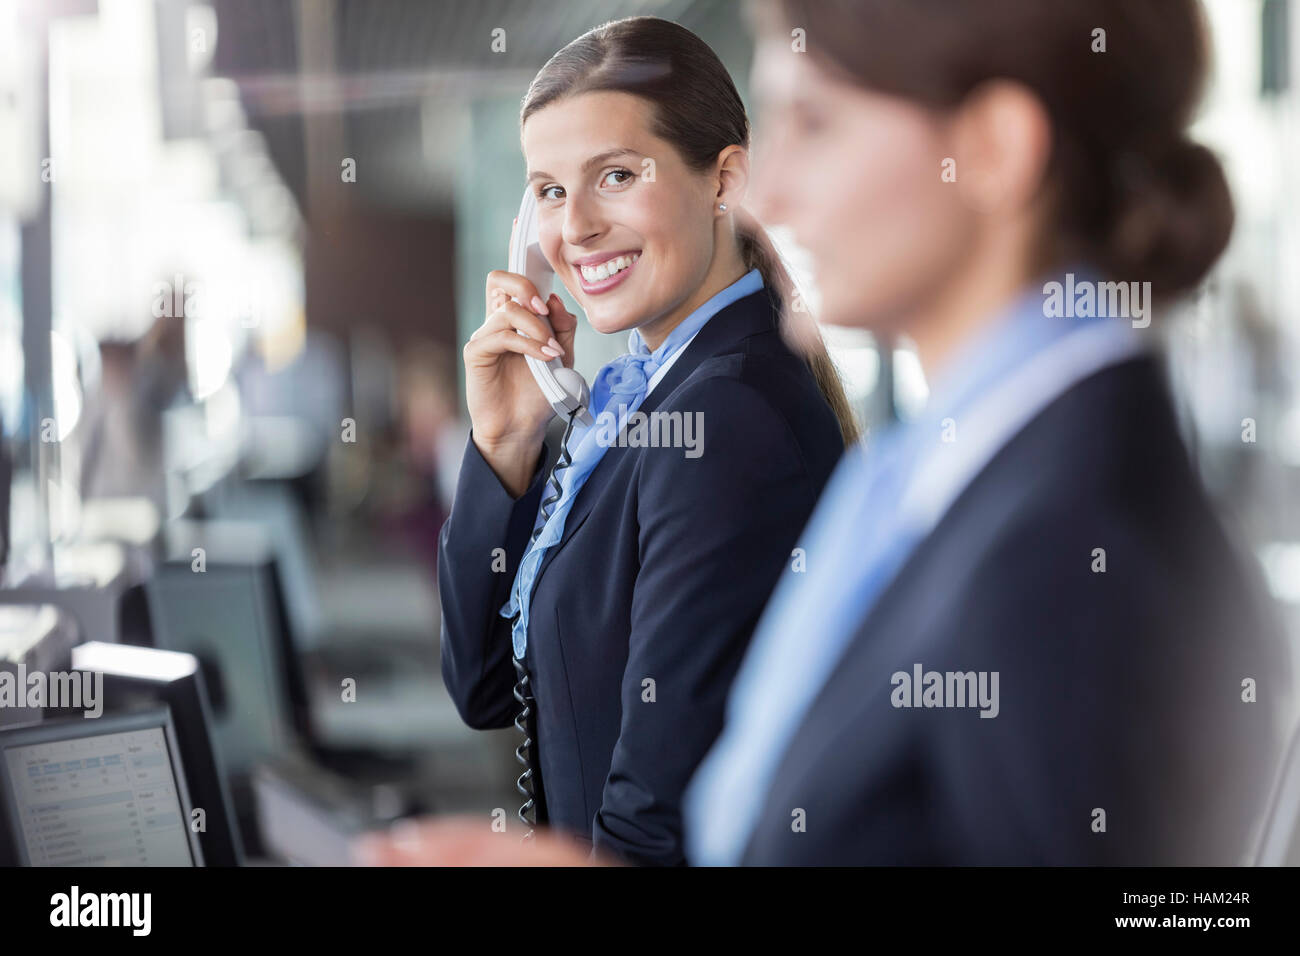 Portrait smiling customer representative talking on telephone at airport check-in counter Stock Photo